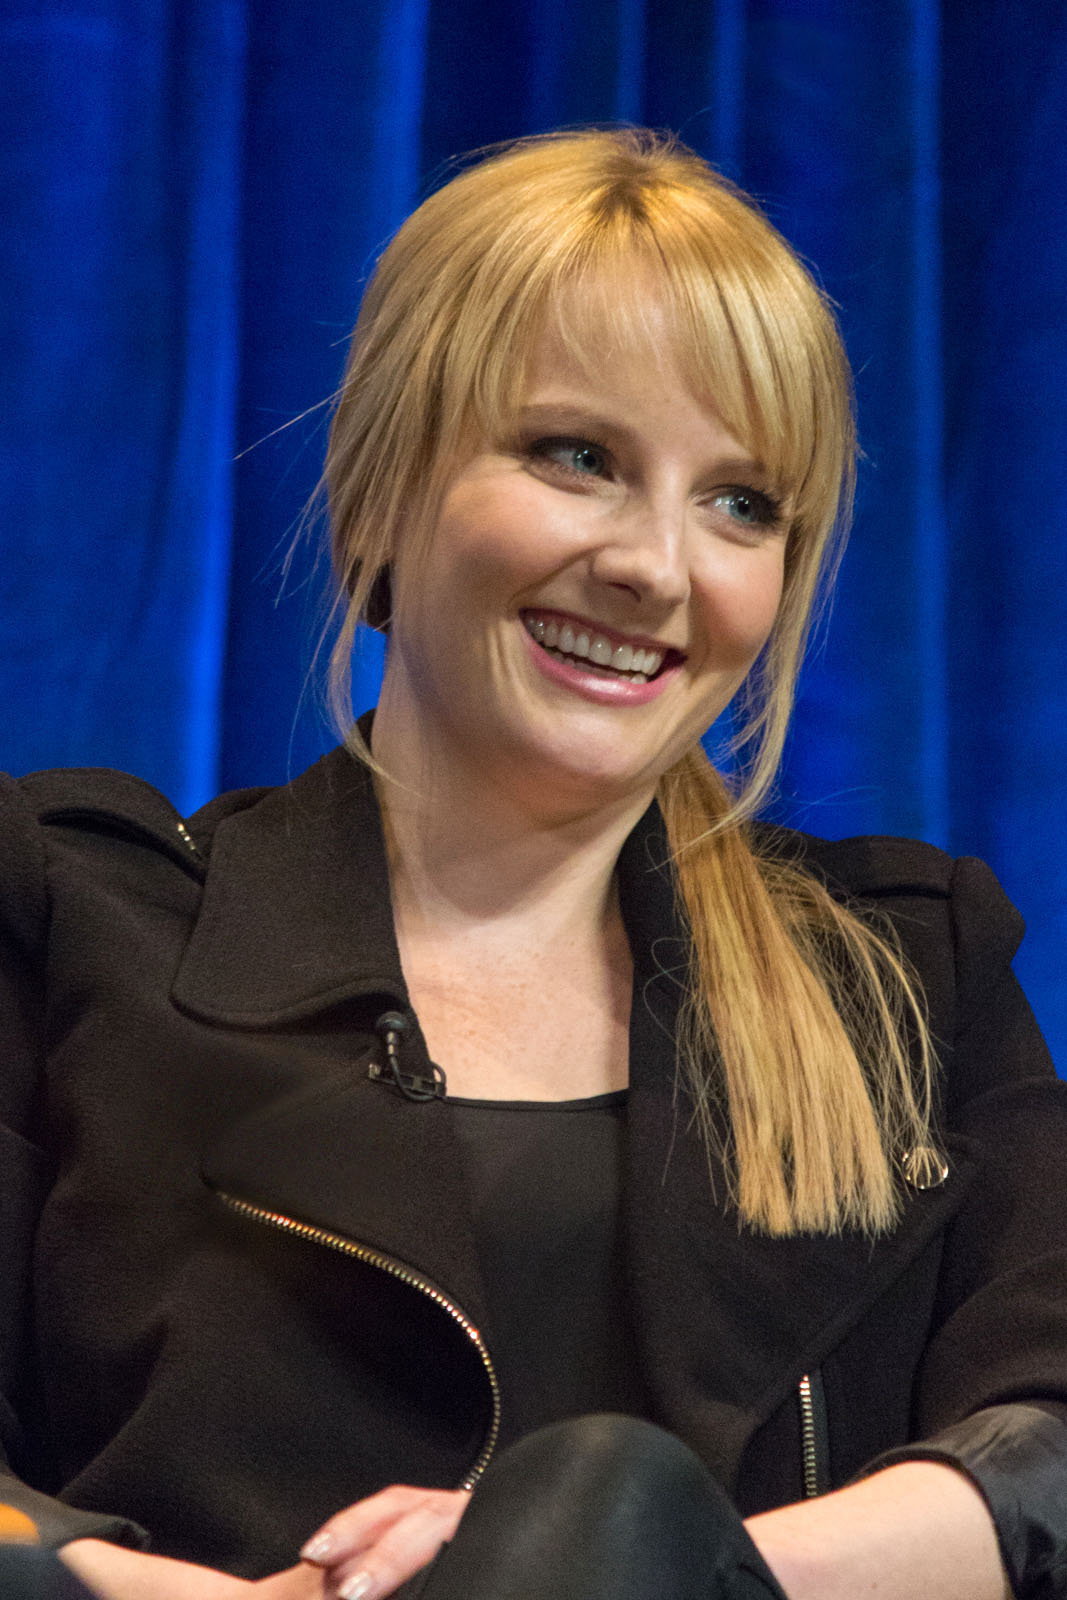 bailey logsdon share pictures of melissa rauch photos